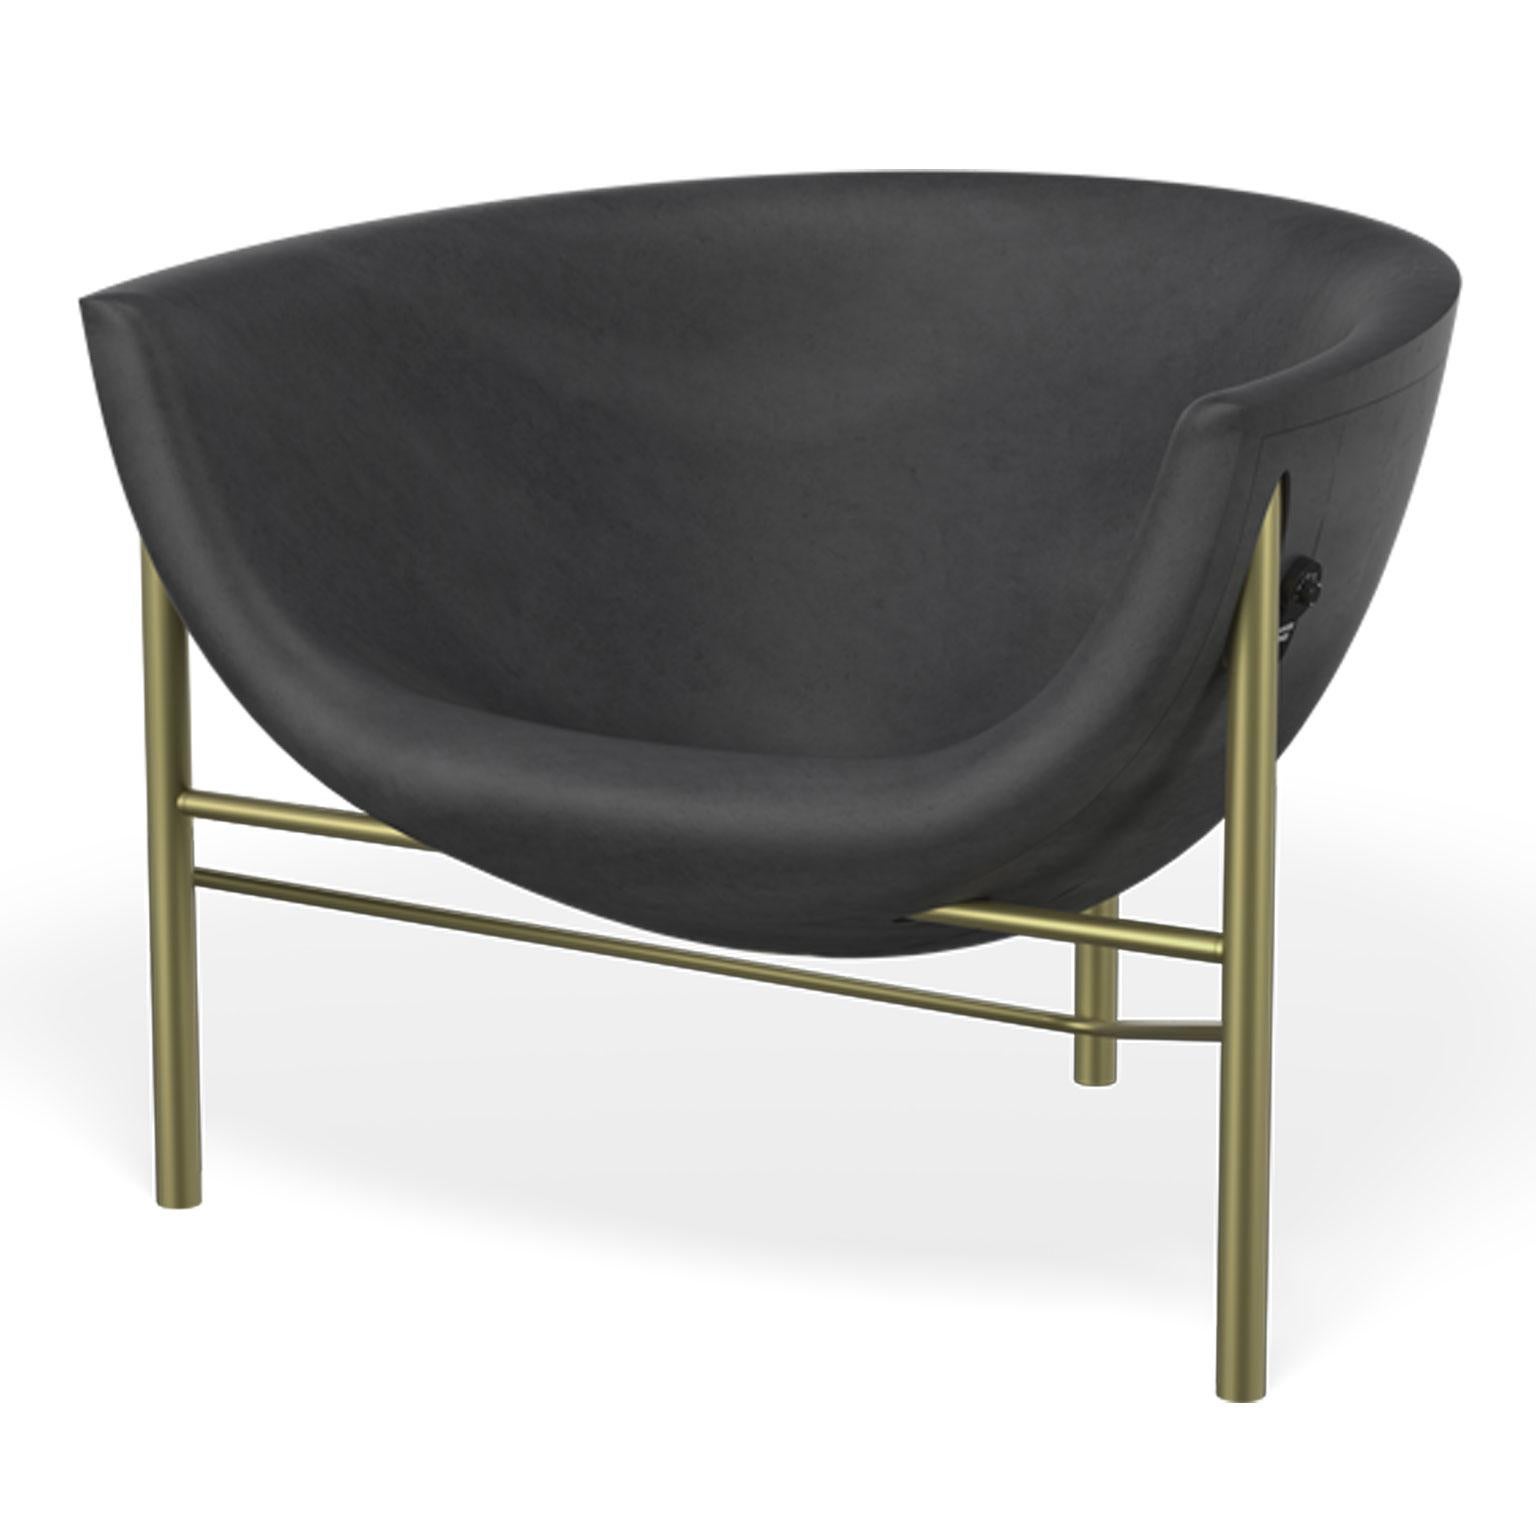 The Kosmos is the newest and lightest piece of heated furniture made of cast stone and stainless steel by Galanter & Jones. Smooth like a river rock, the Helios warms your entire body with its efficient and comfortable design. Imagine the feeling of